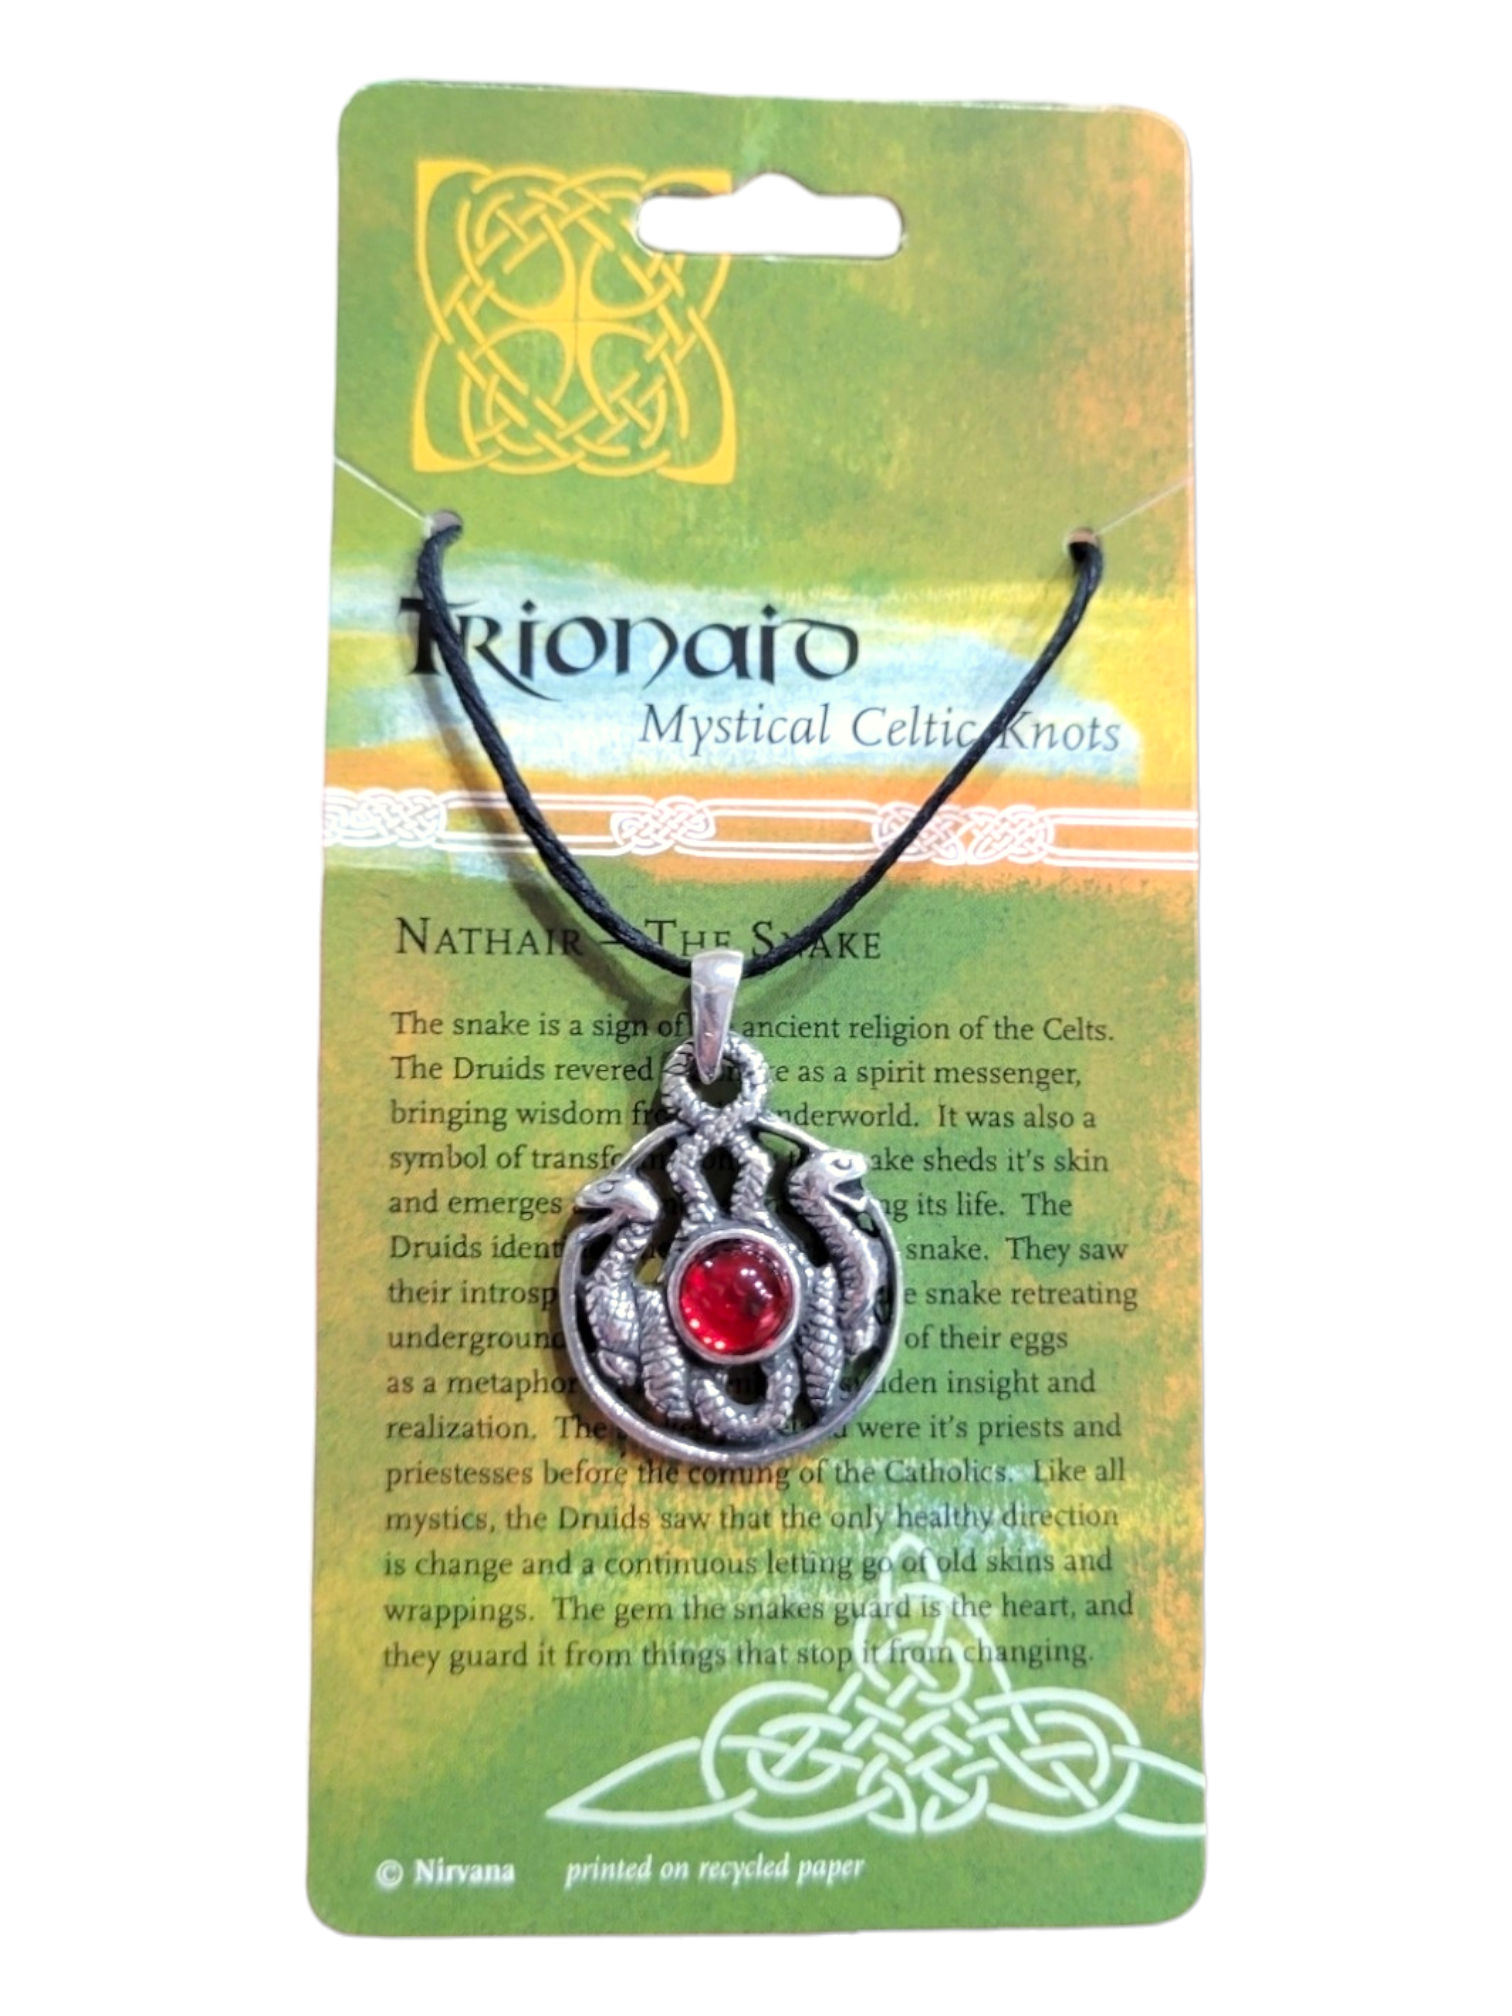 Jewelry: Trionaid Mystical Celtic Knots-Nathair The Snake